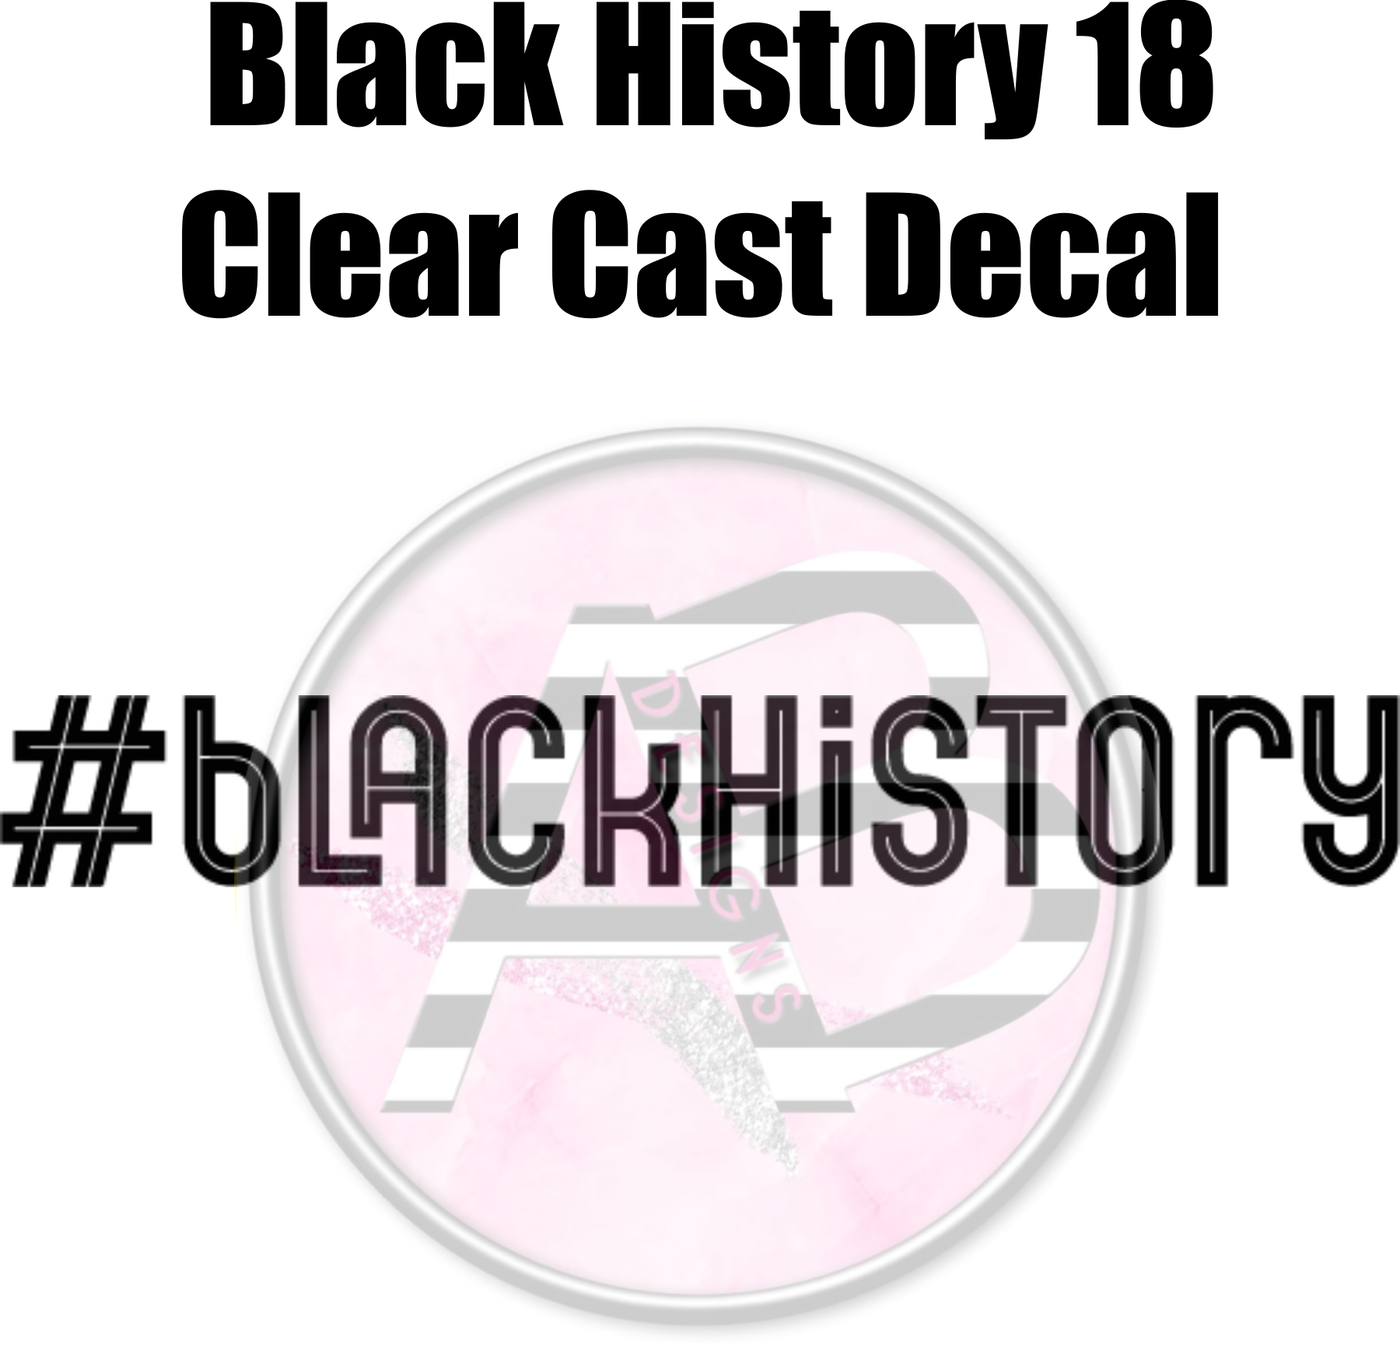 Black History 18 - Clear Cast Decal